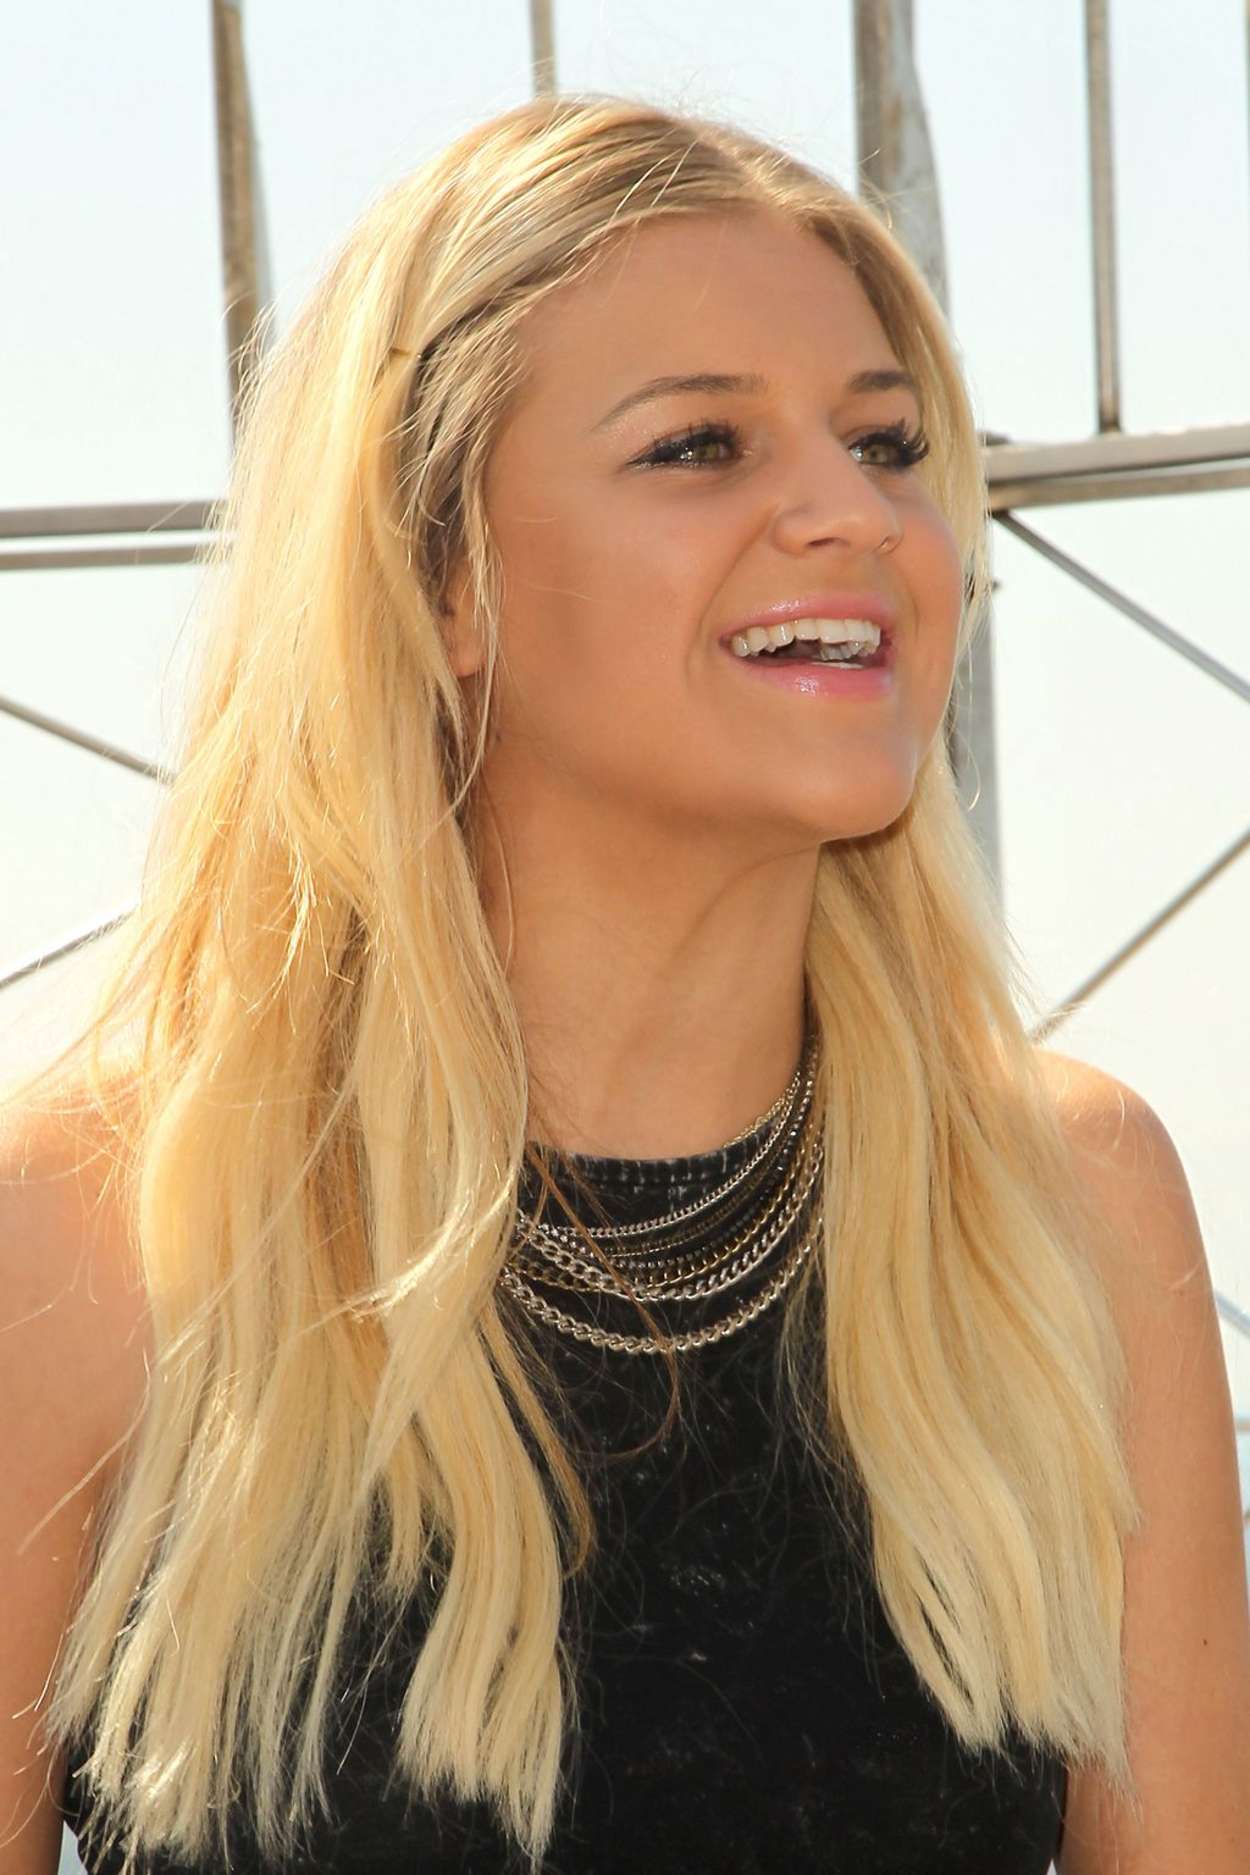 Kelsea Ballerini visits the Empire State Building -02